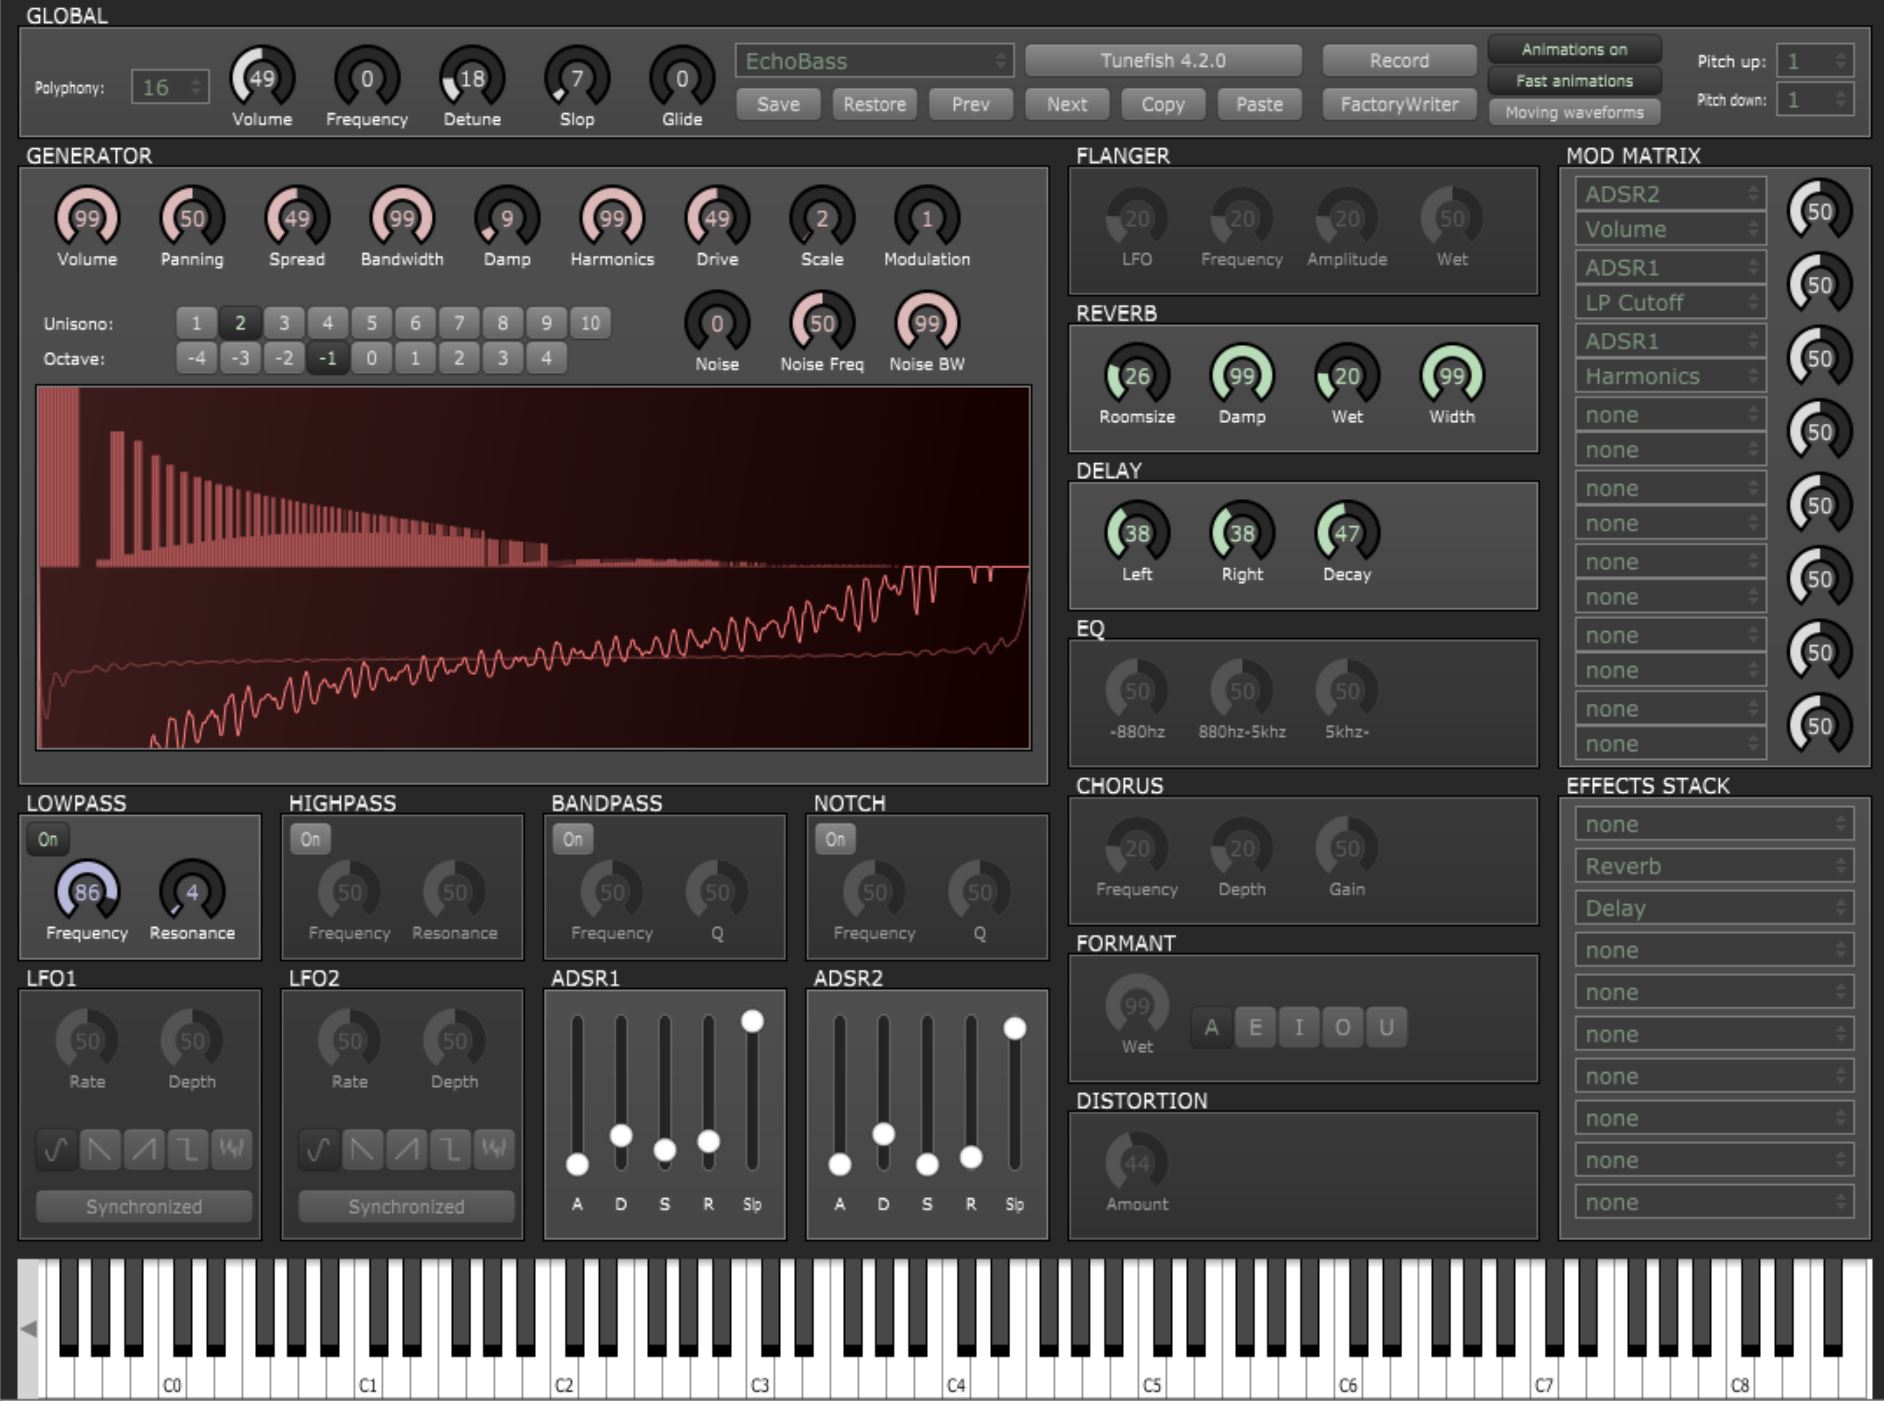 Tunefish 4 free software-synthesizer by Brain Control